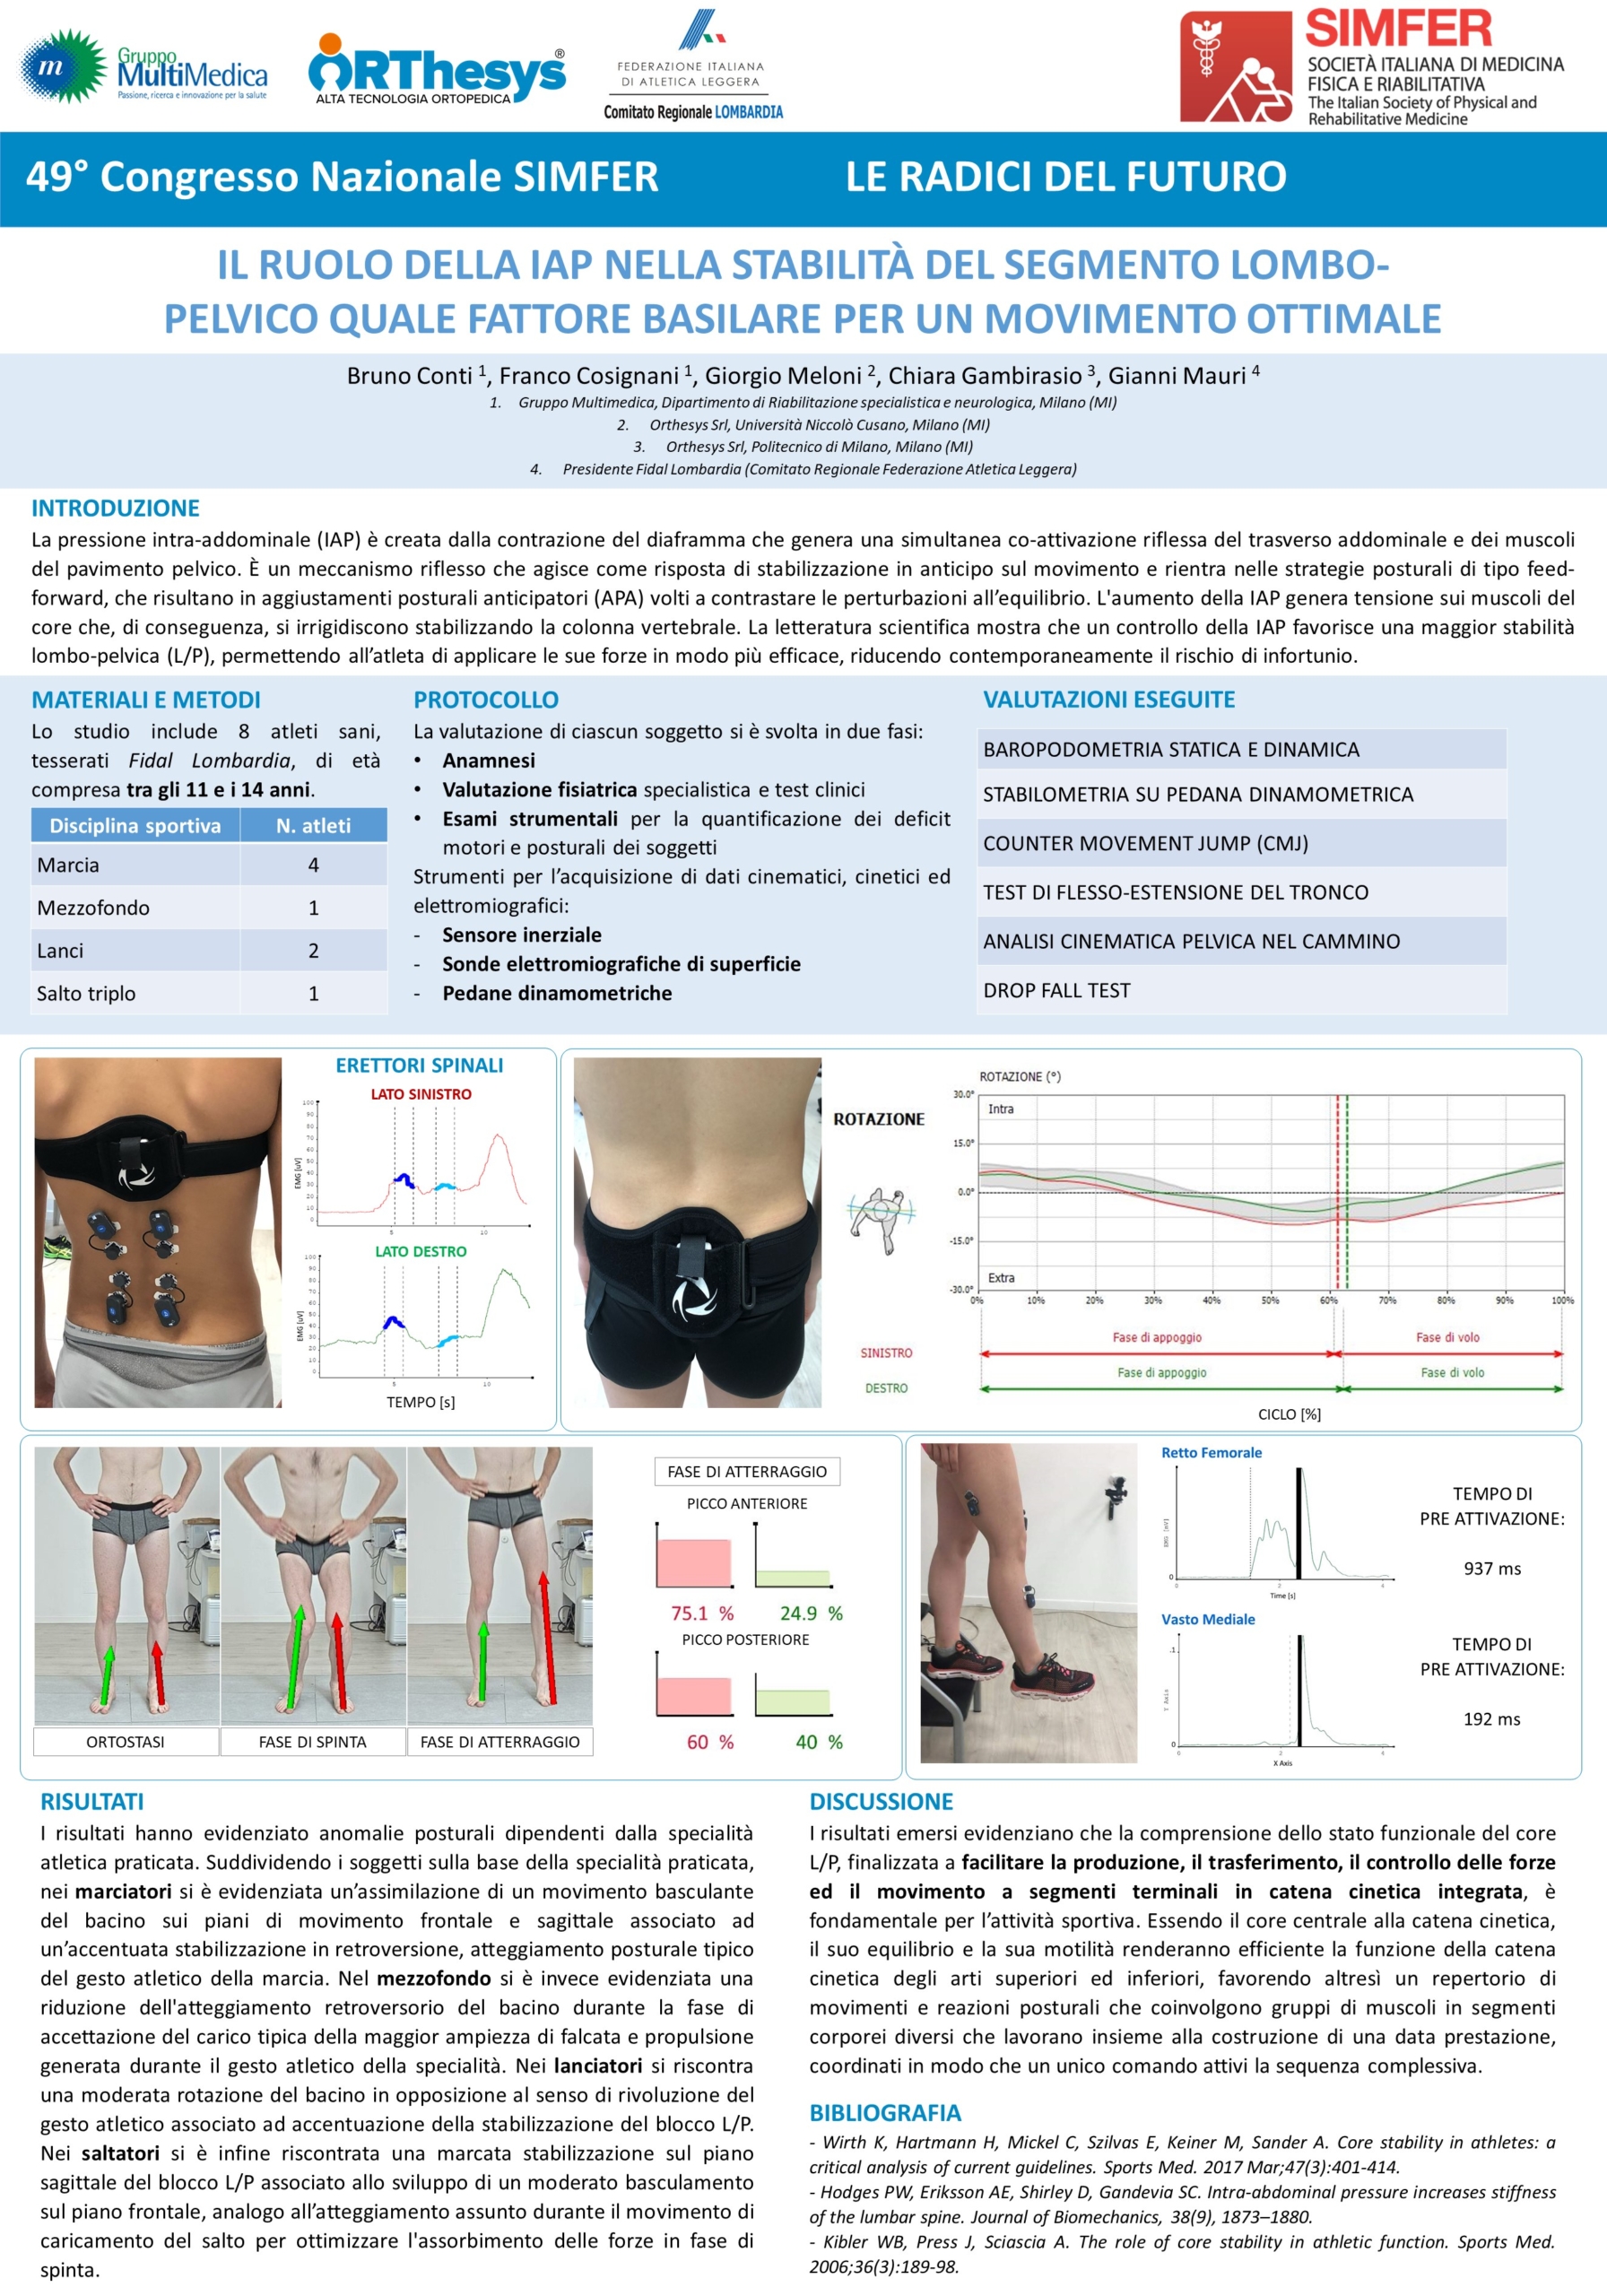 ORTHESYS - POSTER SIMFER 2021